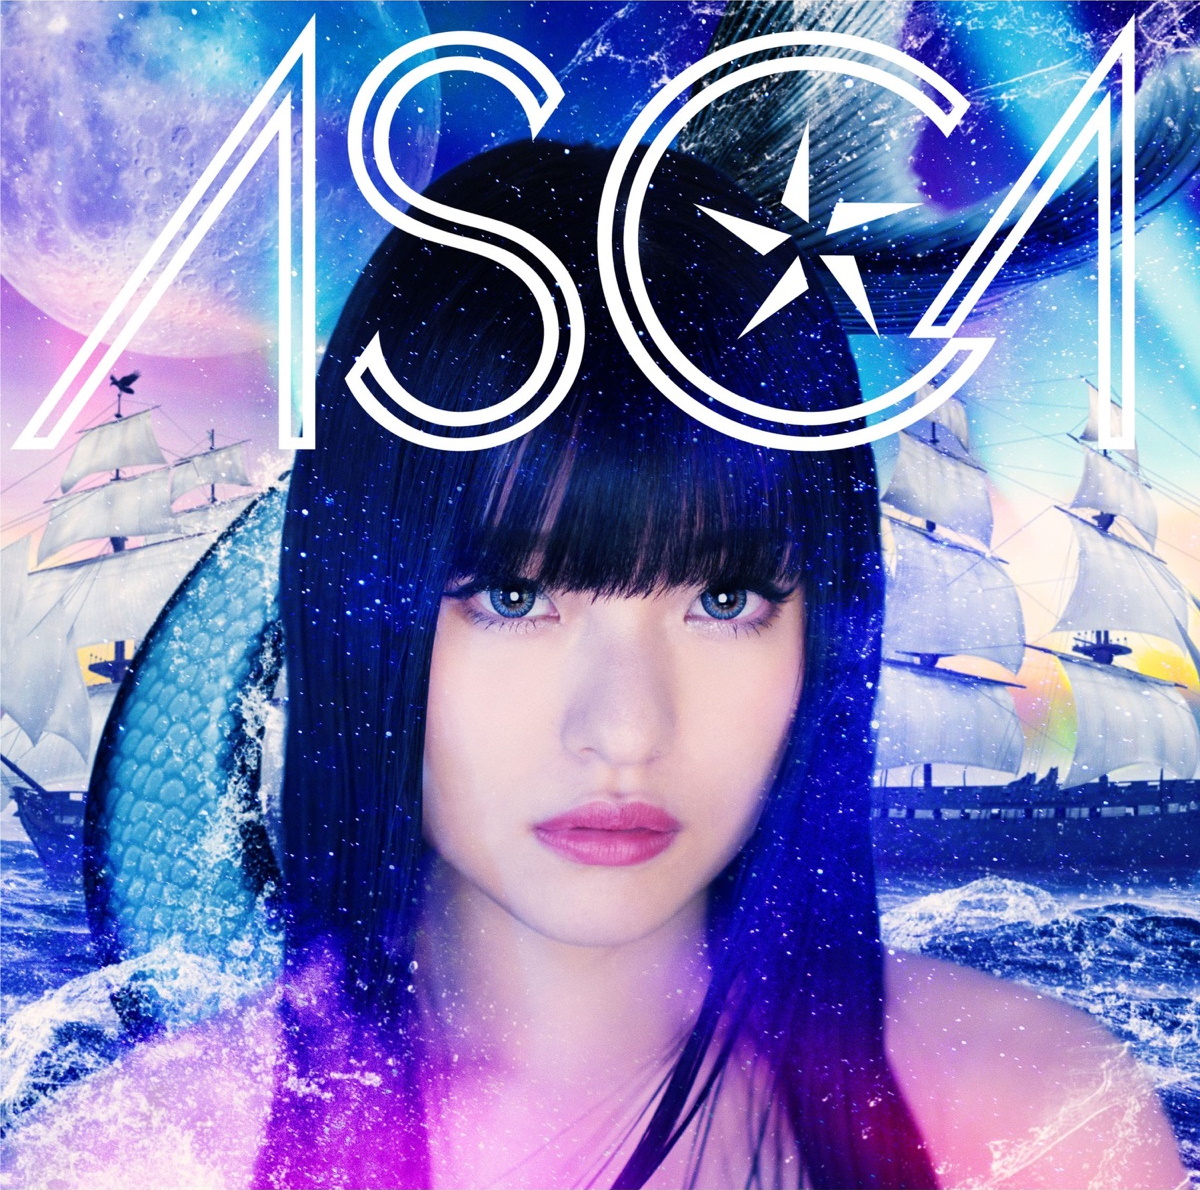 Cover for『ASCA - DESIRE』from the release『Hyakki Yakou』